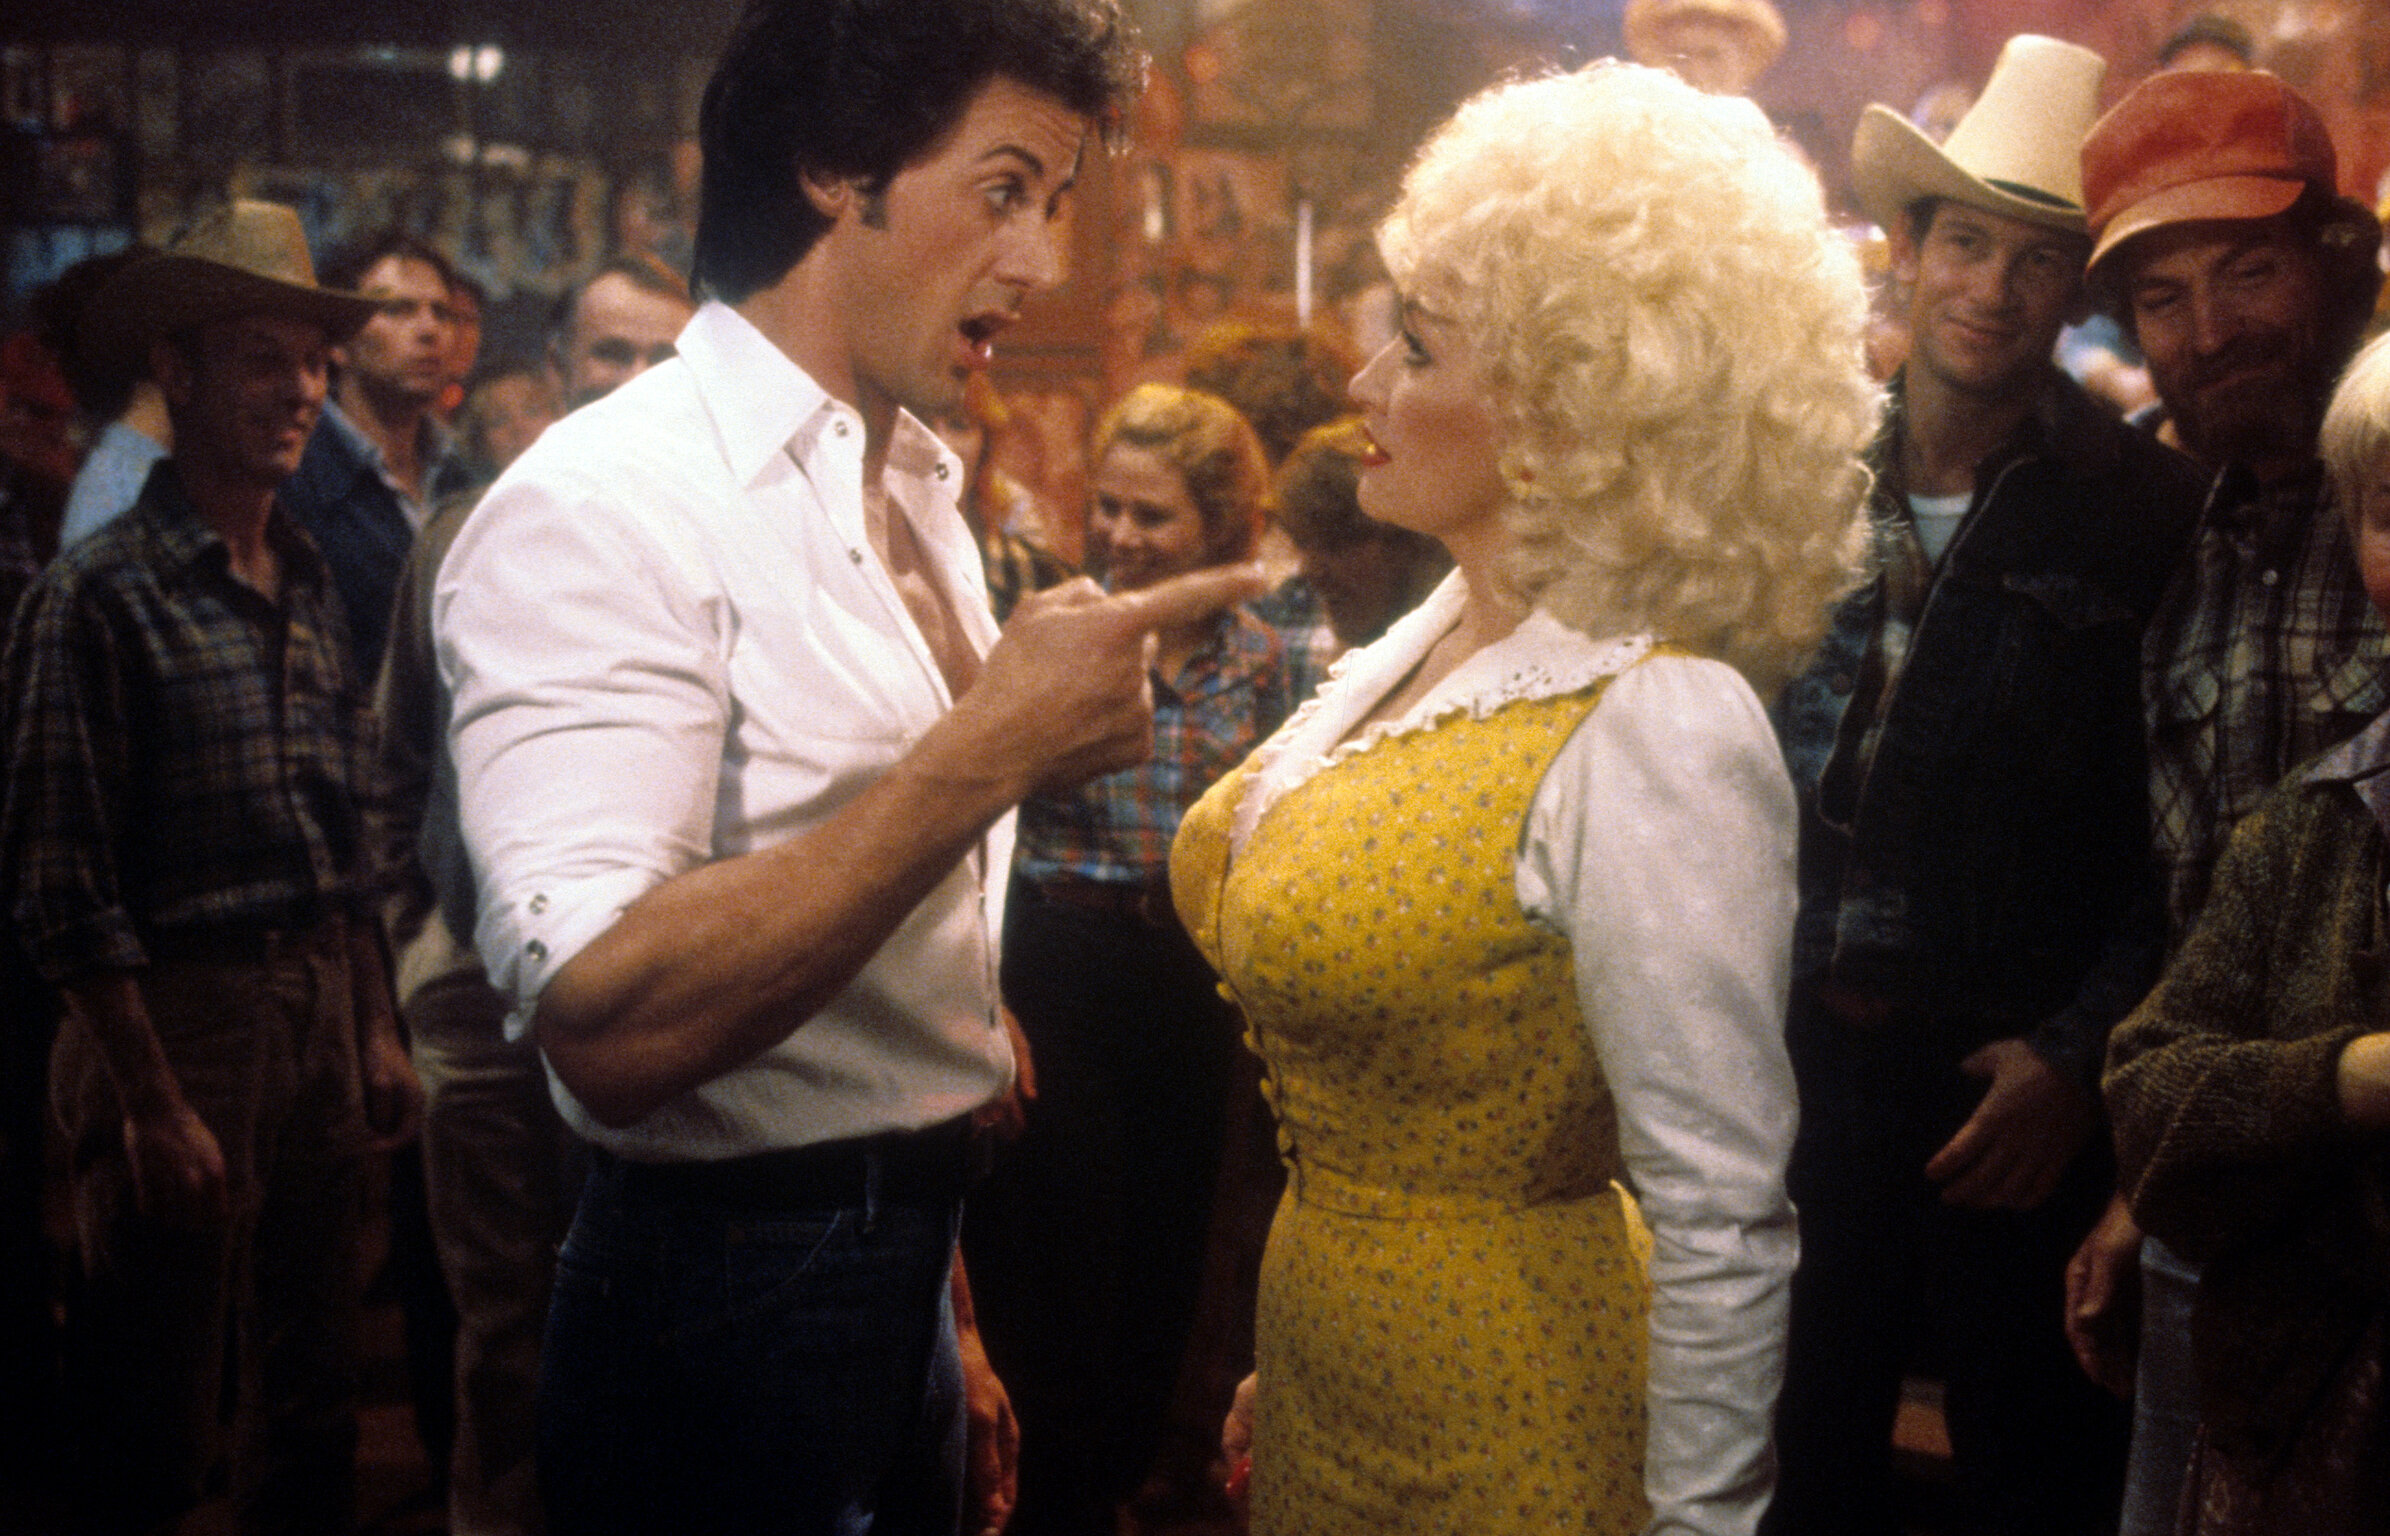 Sylvester Stallone points to Dolly Parton in a scene from the film 'Rhinestone', 1984.